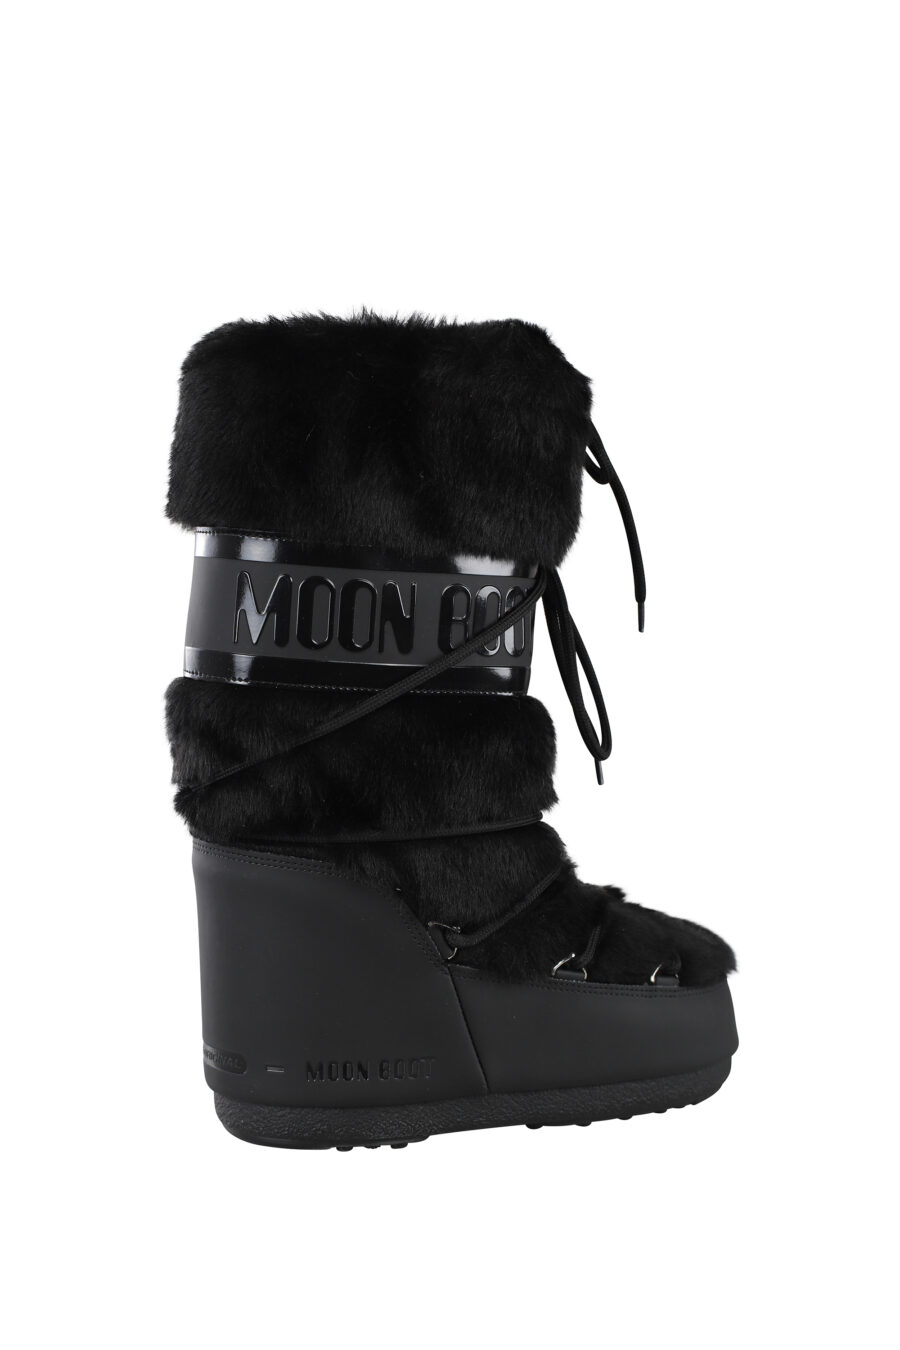 Black snow boots with monochrome logo - IMG 6793